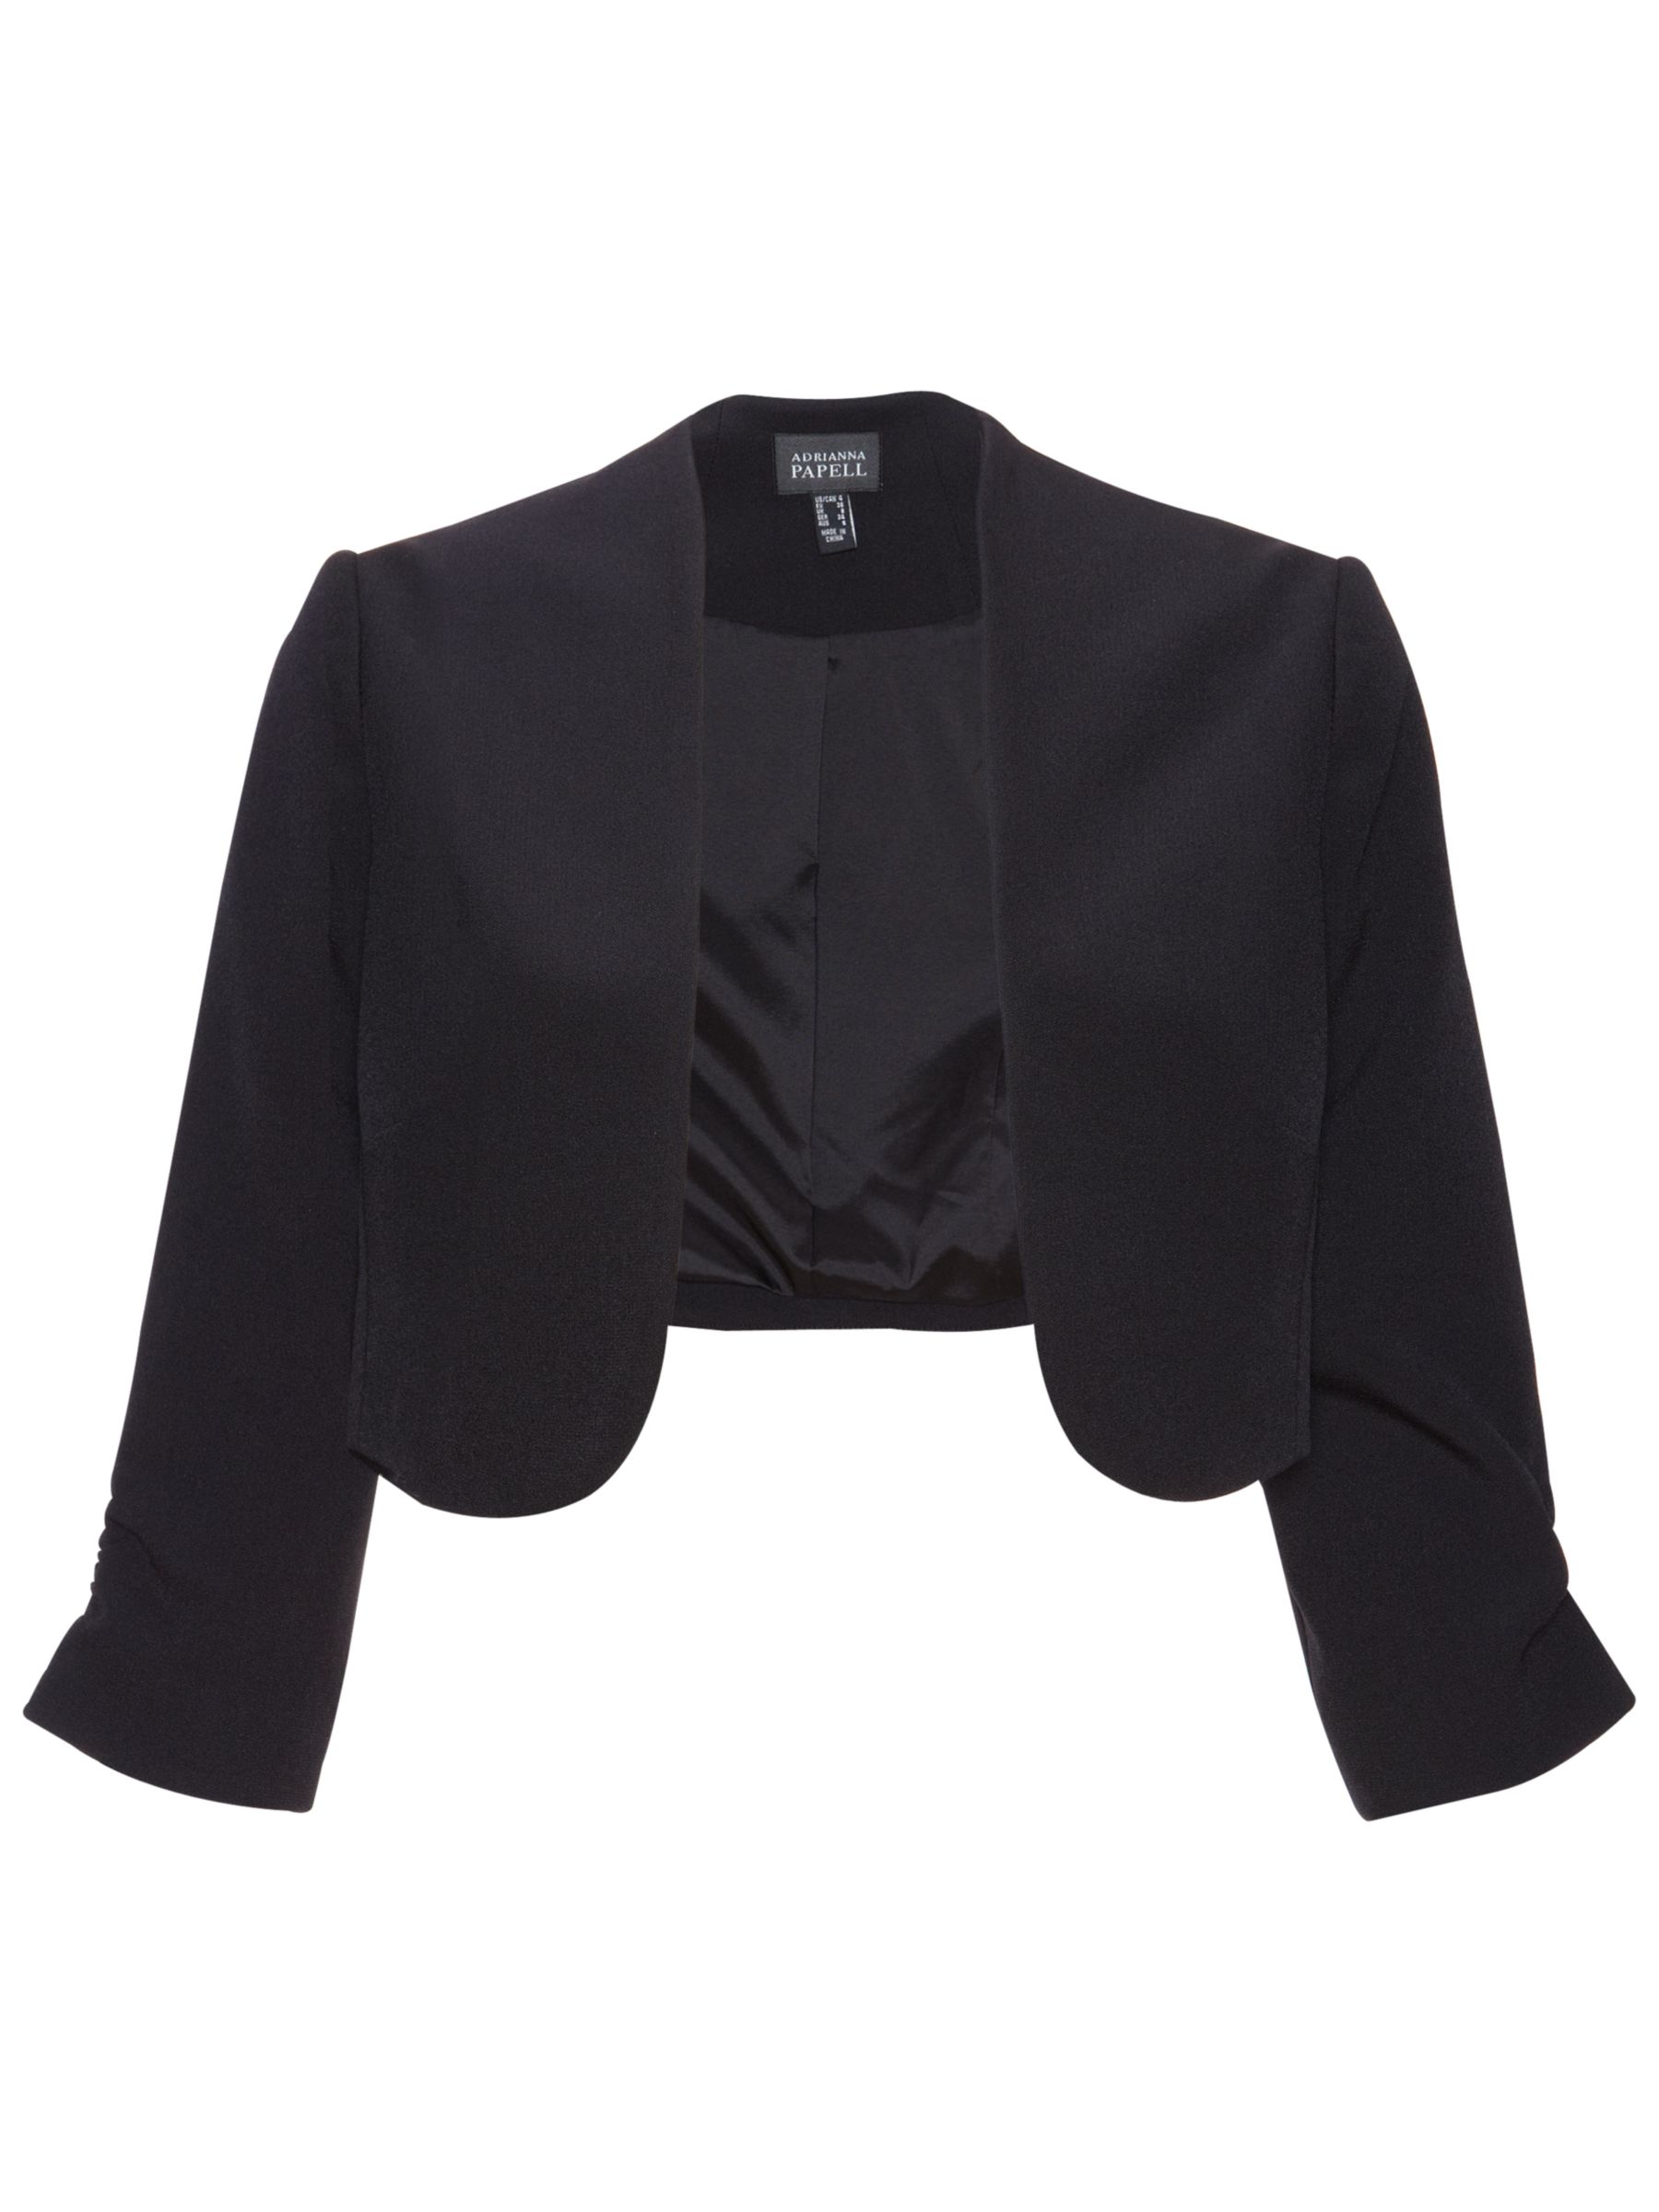 ladies evening jackets and shawls